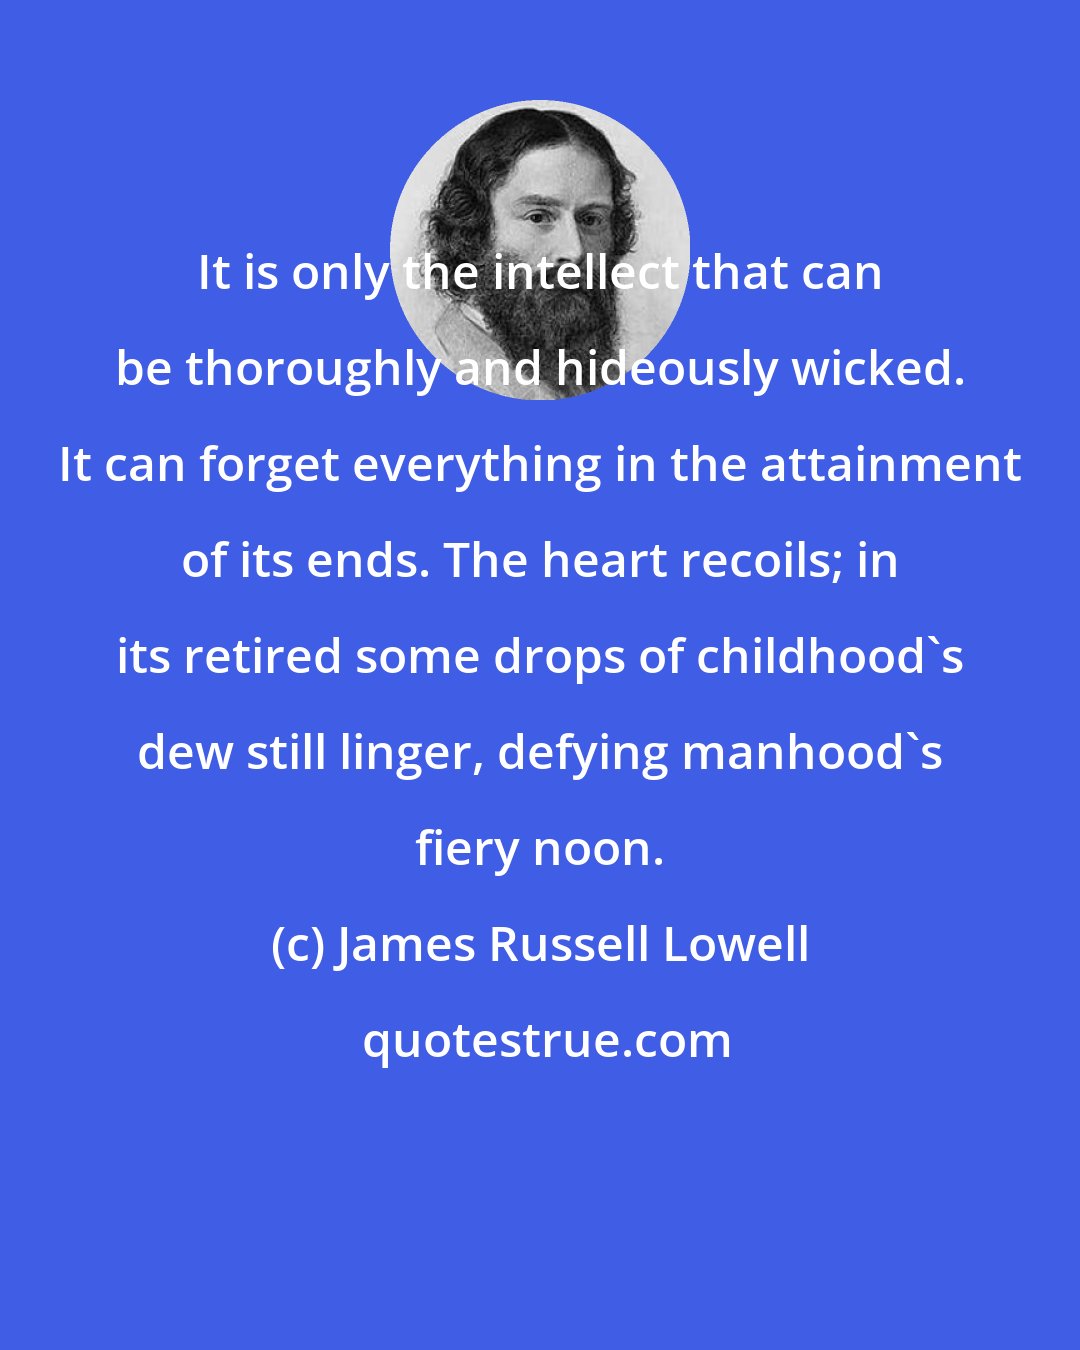 James Russell Lowell: It is only the intellect that can be thoroughly and hideously wicked. It can forget everything in the attainment of its ends. The heart recoils; in its retired some drops of childhood's dew still linger, defying manhood's fiery noon.